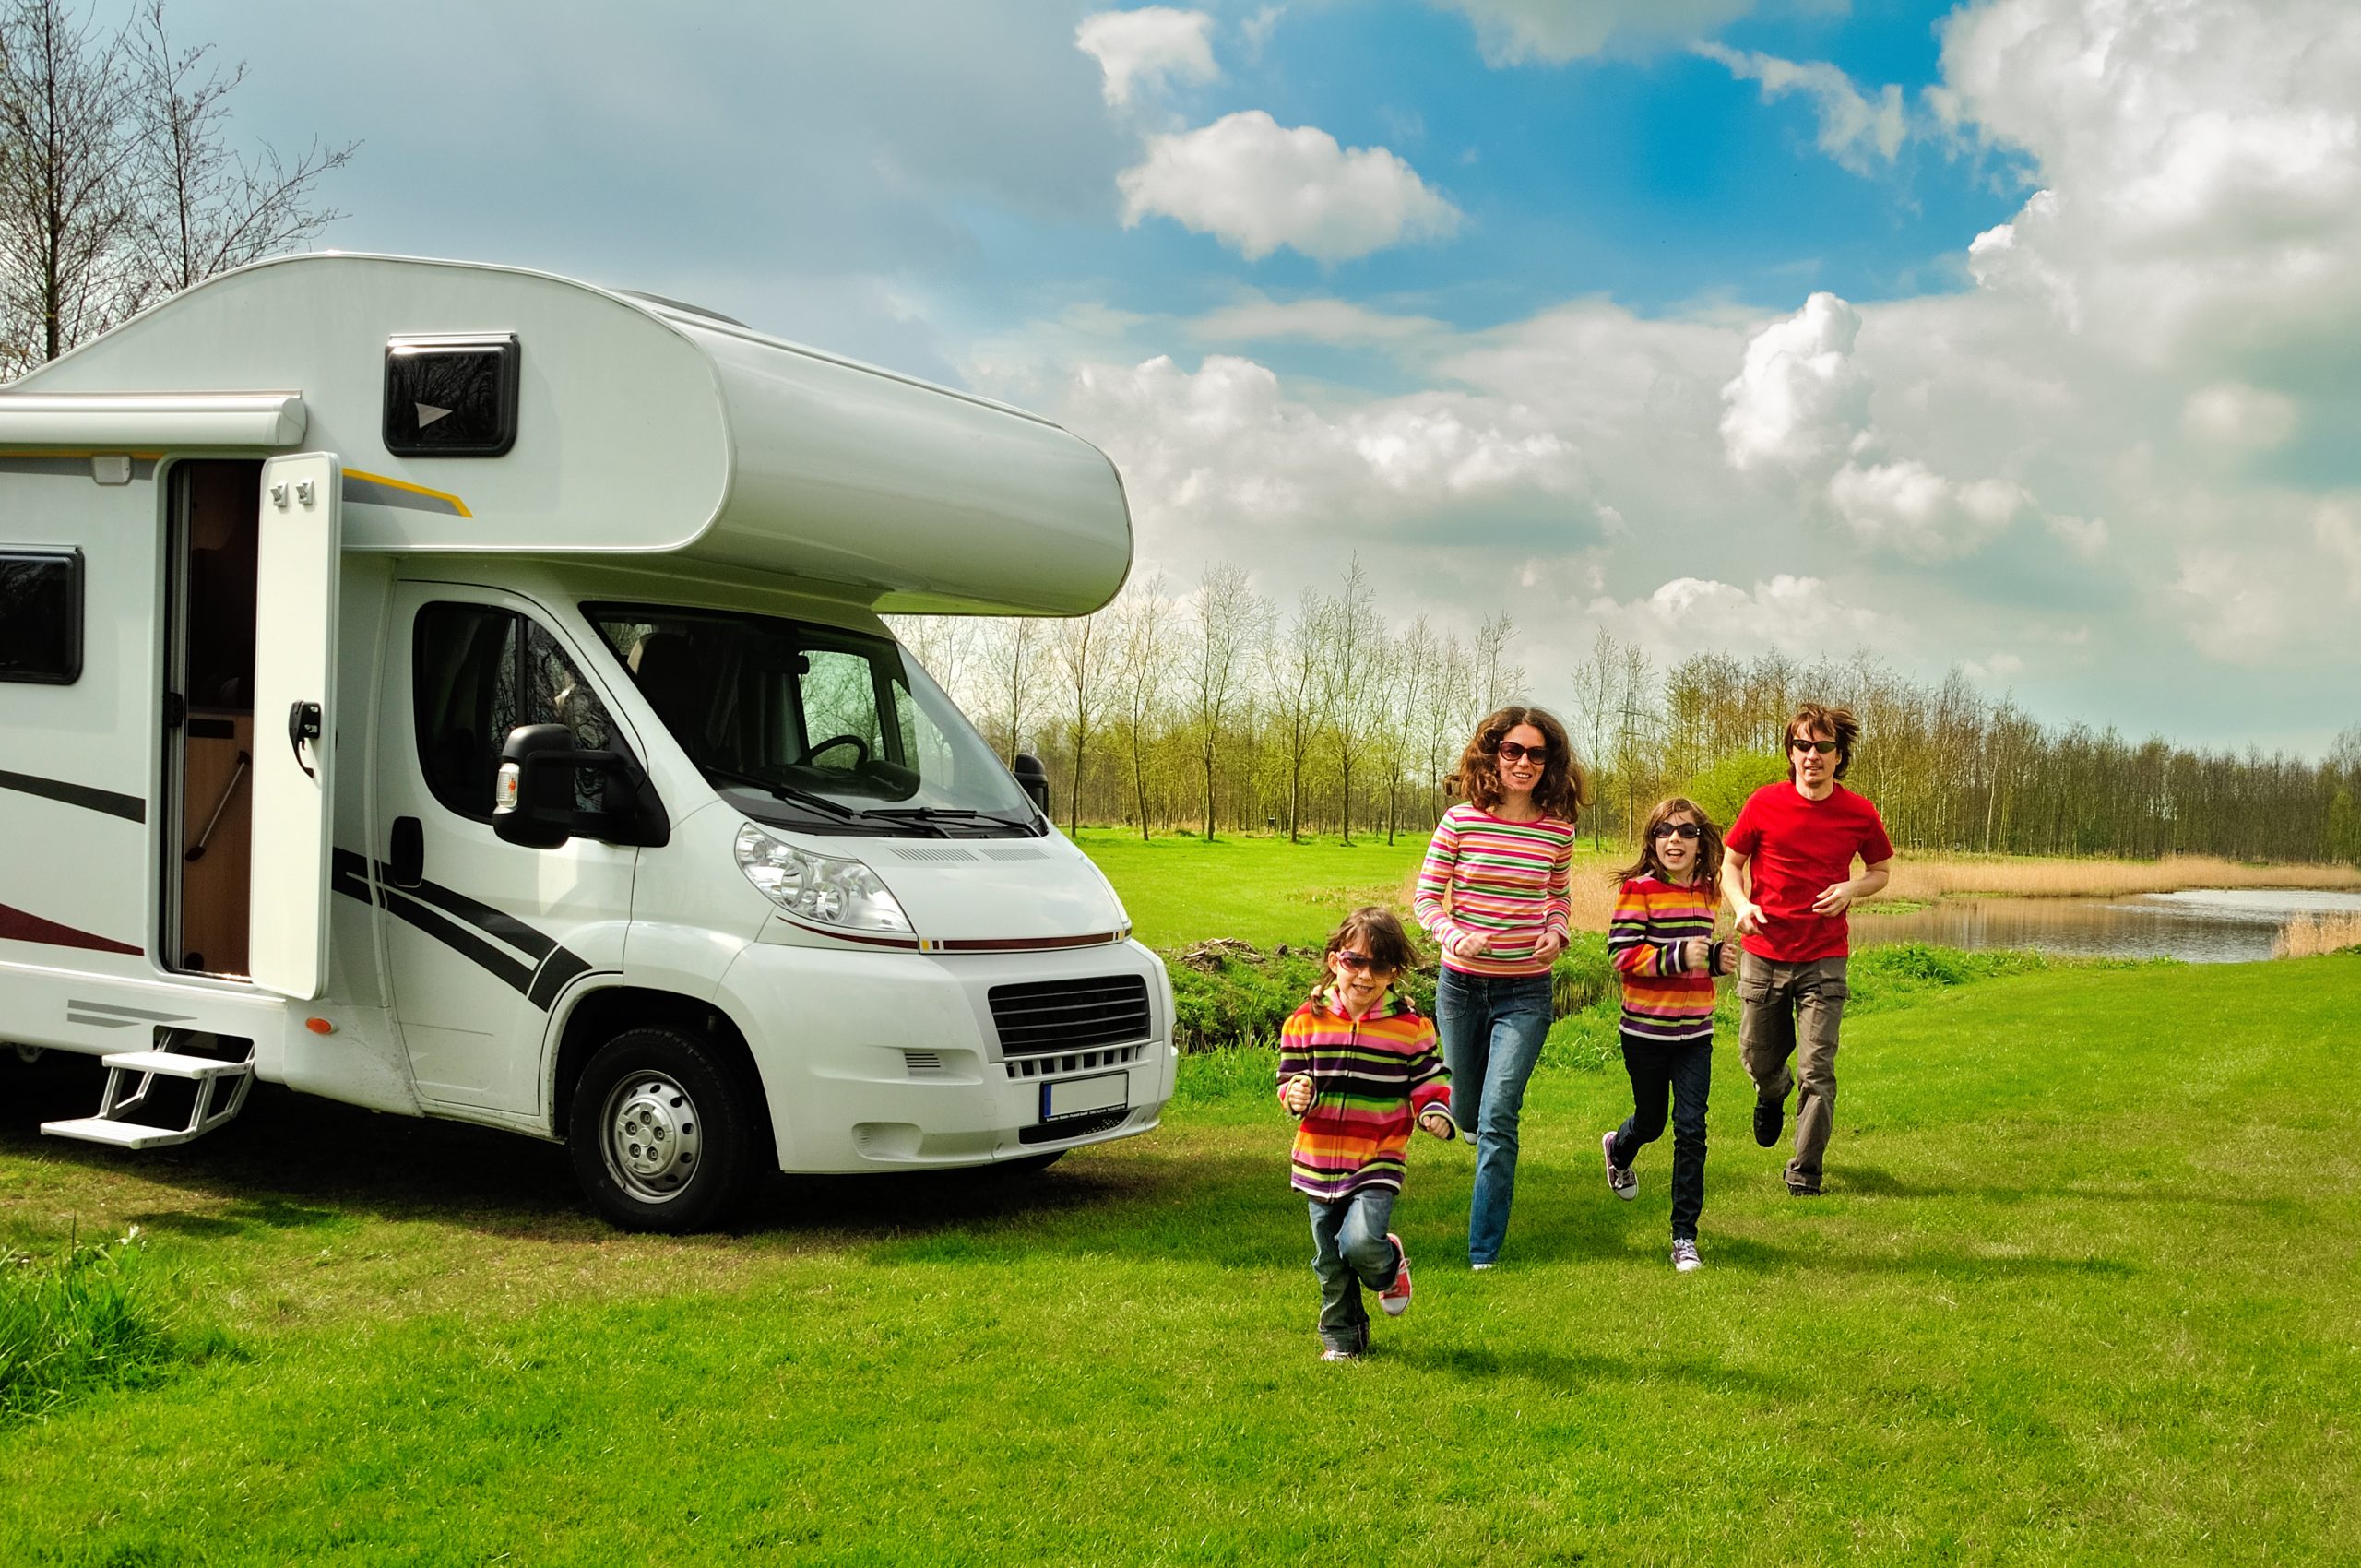 Family vacation, RV travel with kids, happy parents with children have fun on holiday trip in motorhome, camper exterior